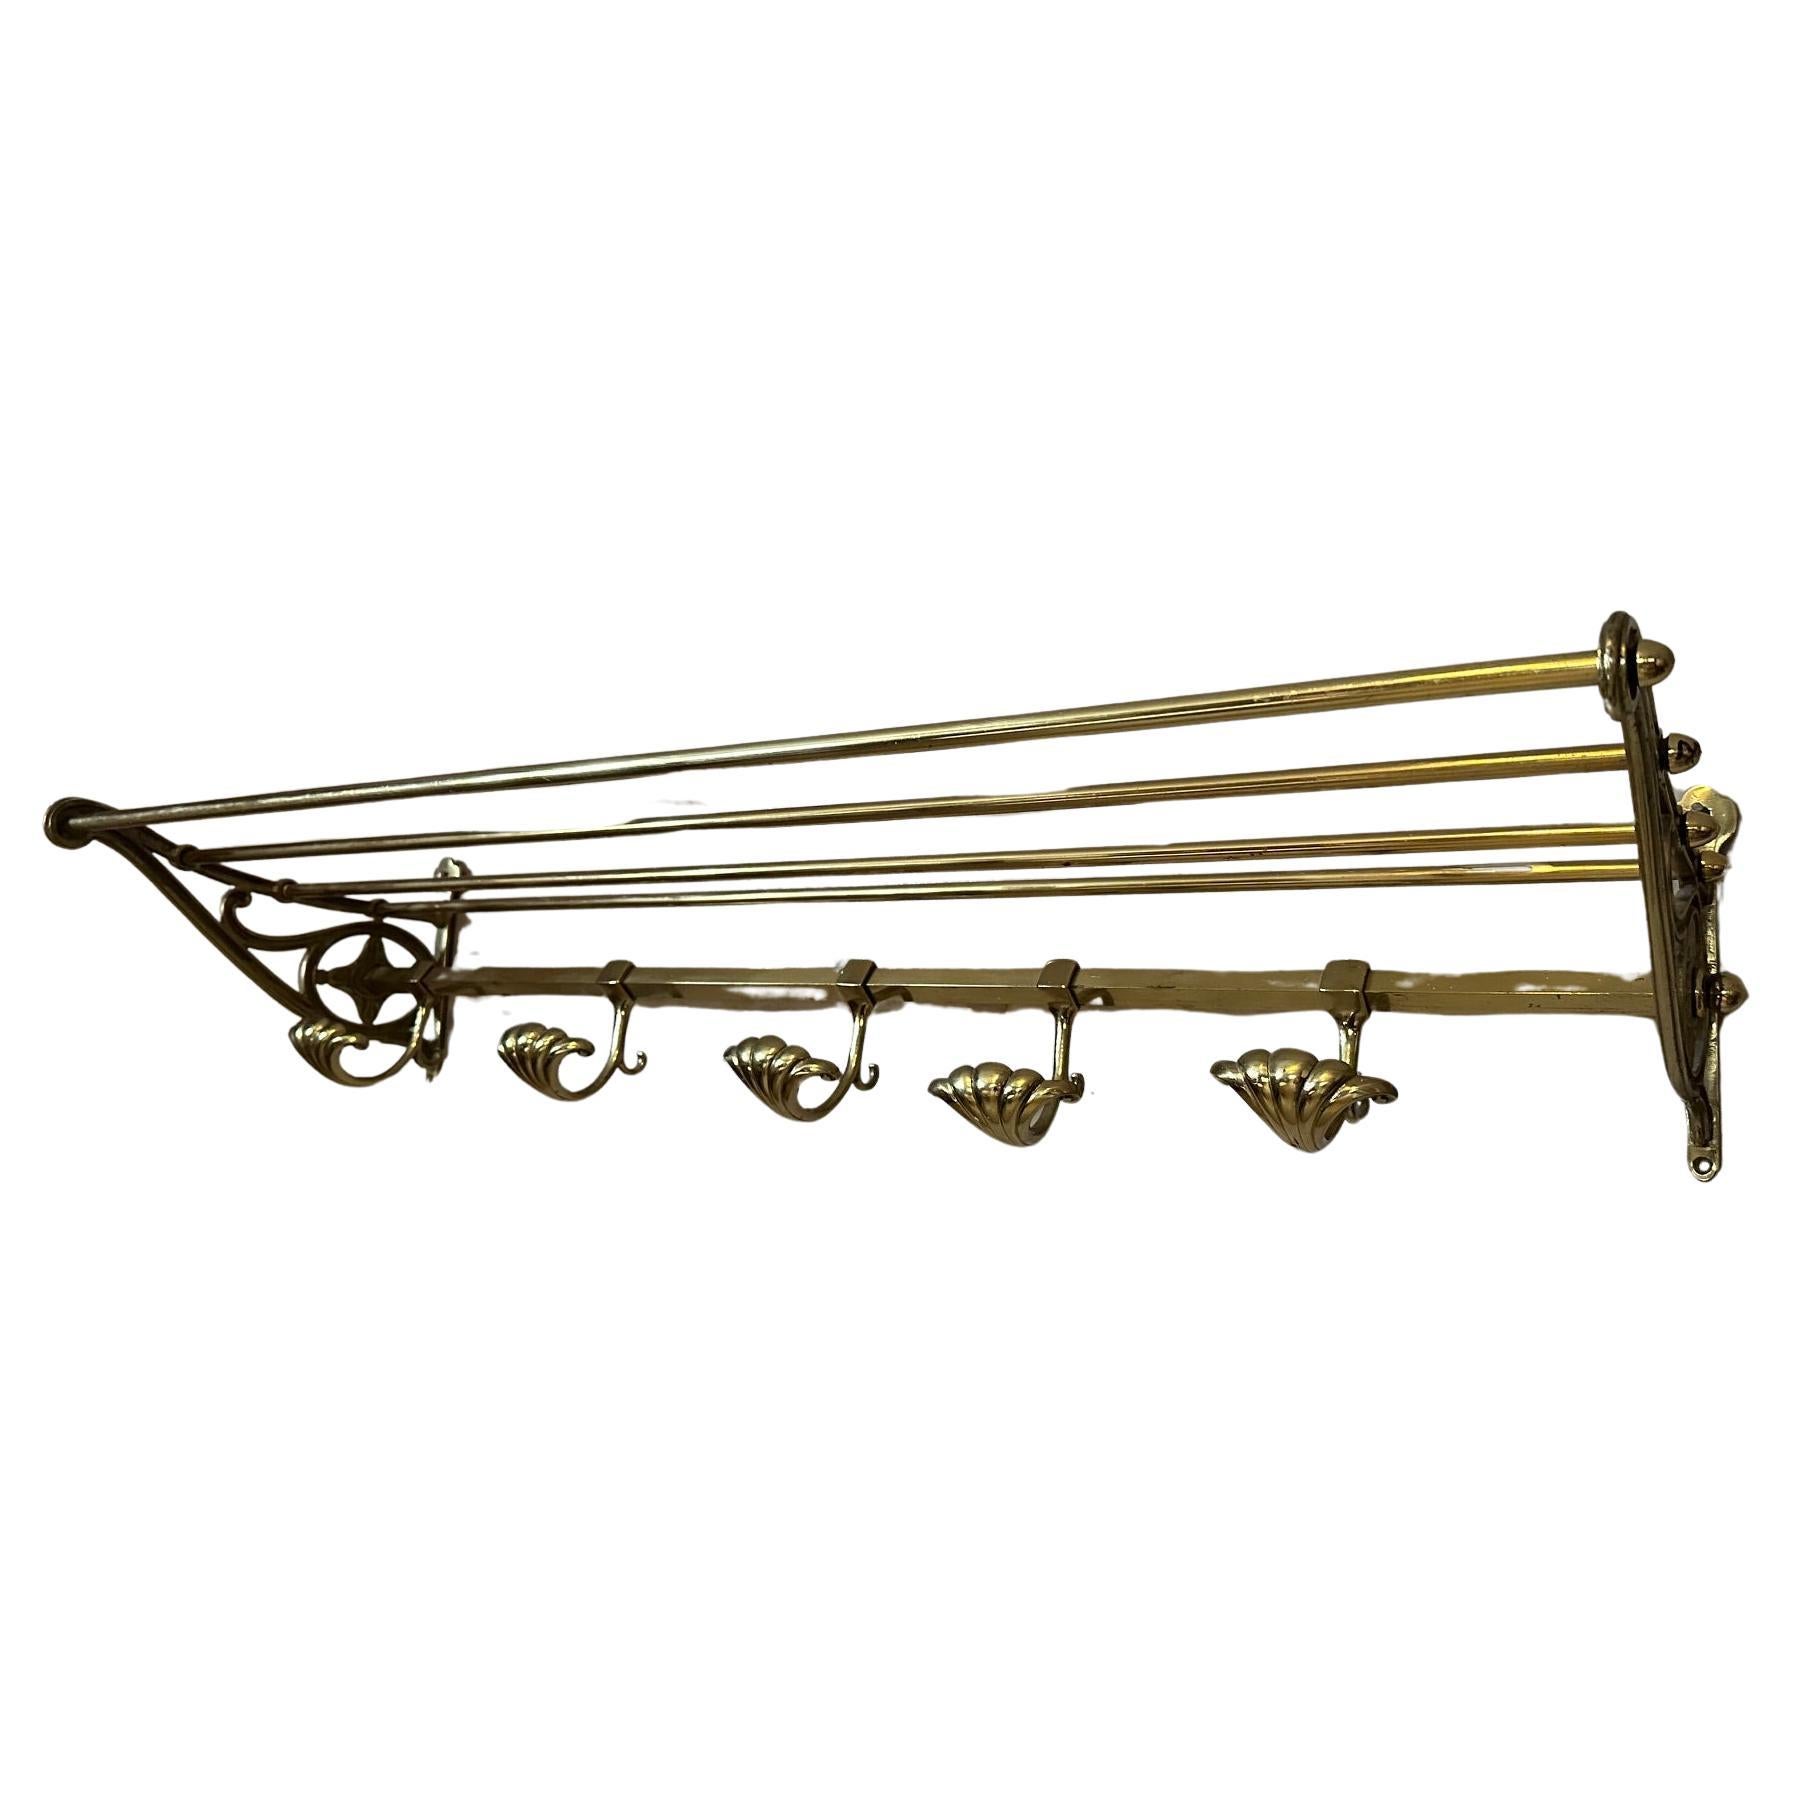 20th century French Art Deco Brass Coat and Luggage Rack, 1930s For Sale